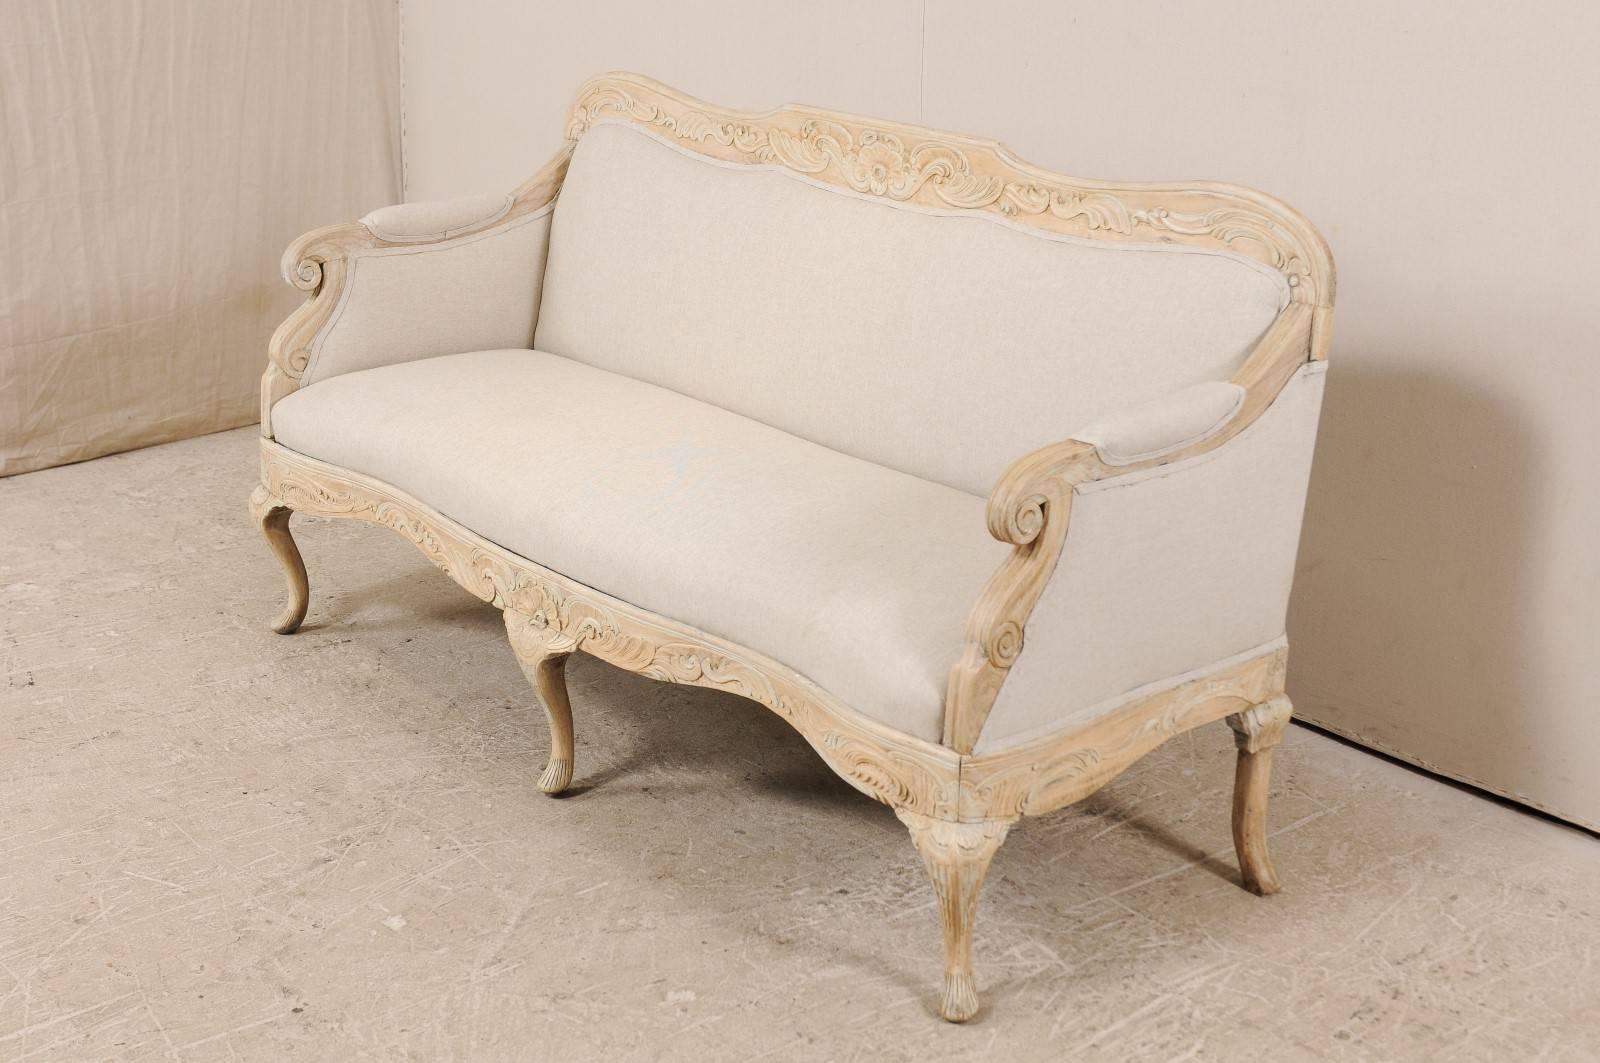 European Danish Period Rococo 18th Century Sofa with Beautiful Floral Carved Details For Sale